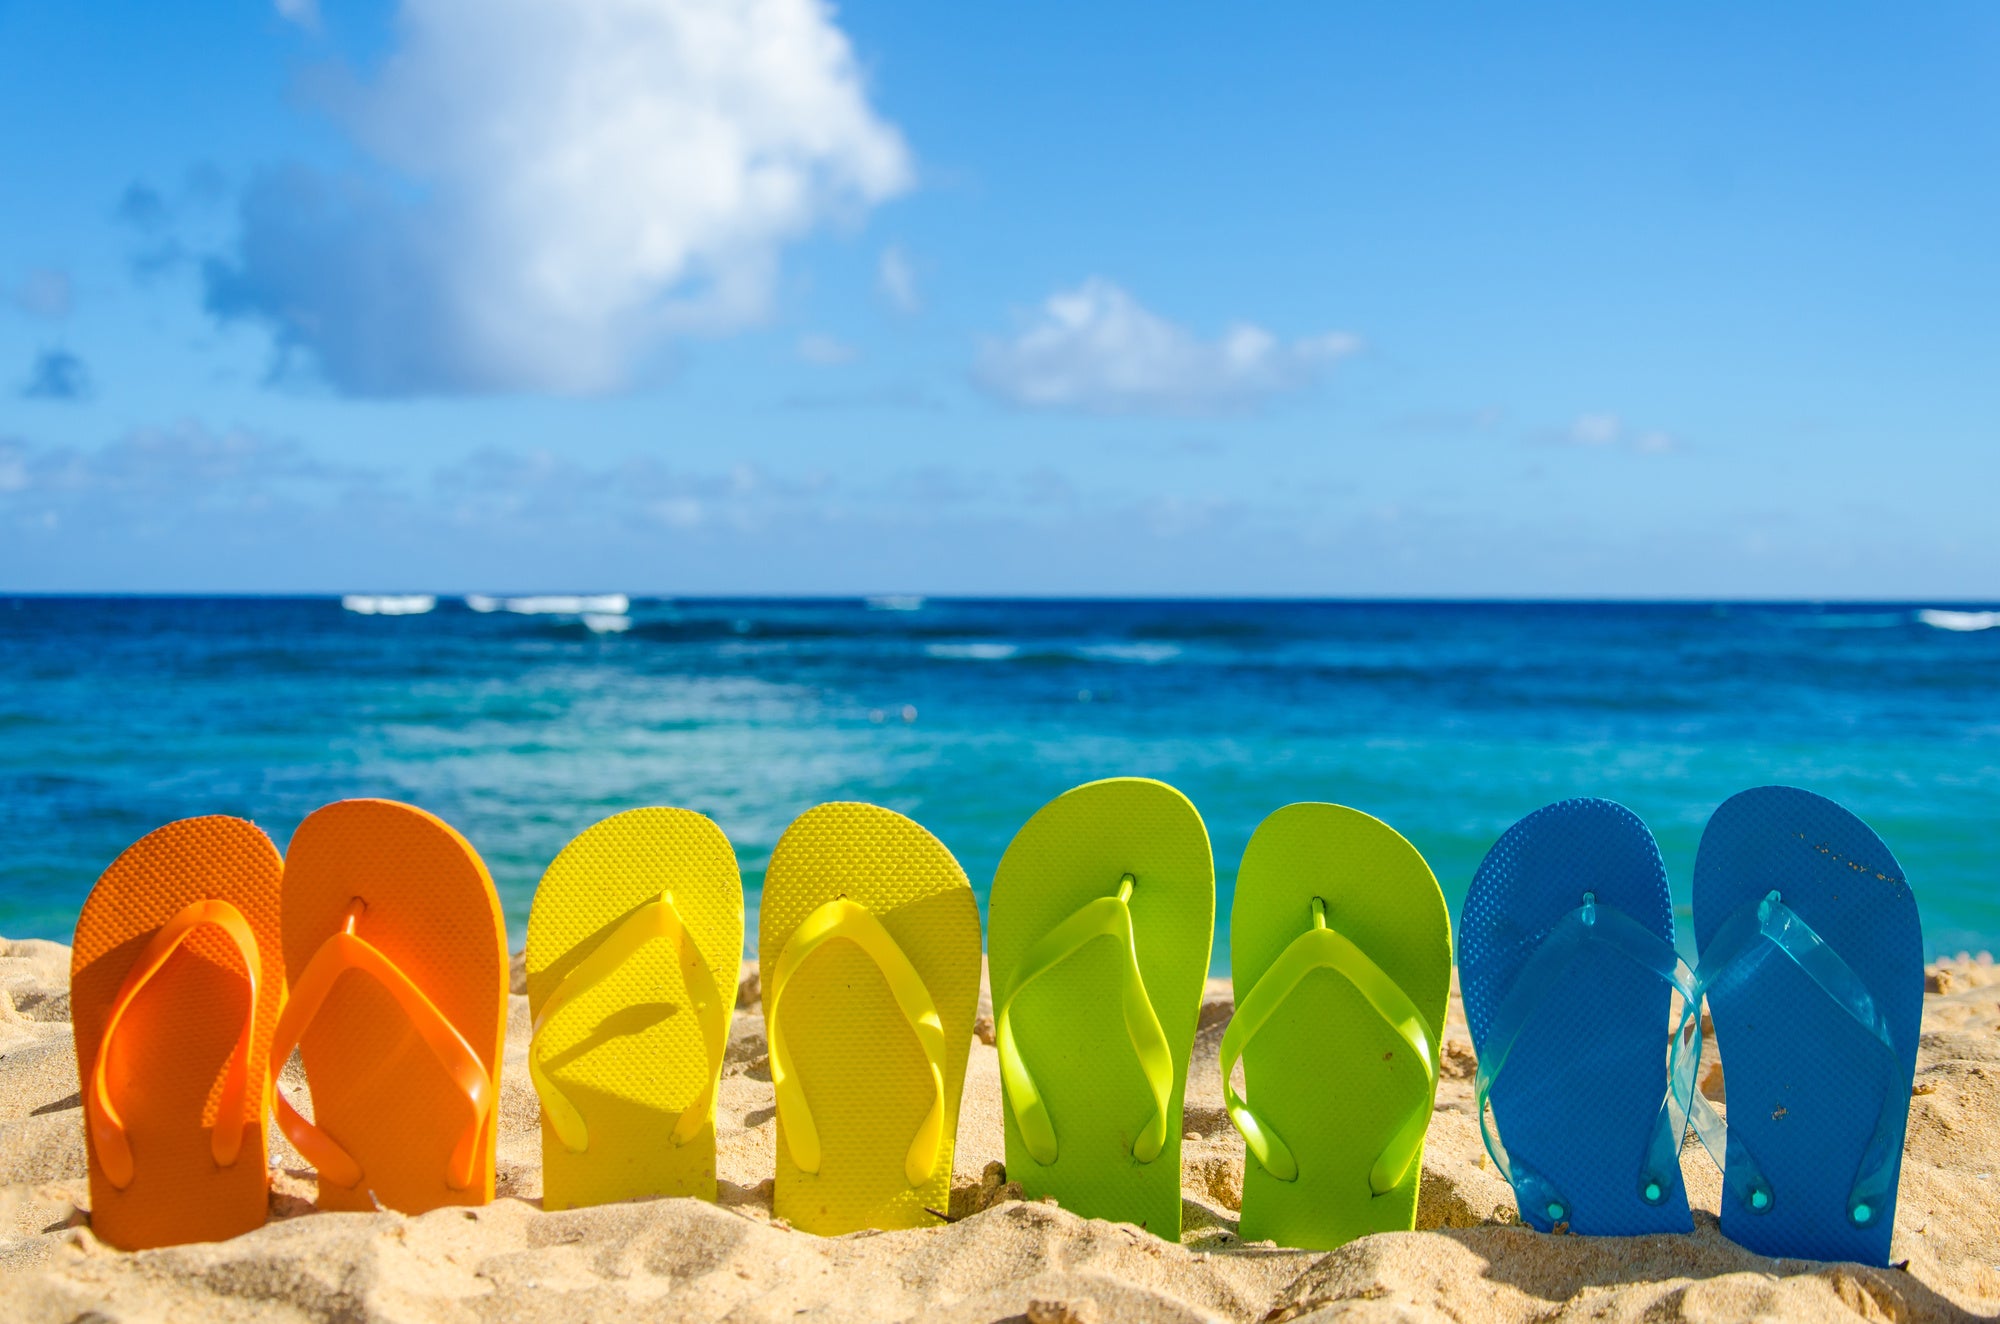 Rubber or Leather? How to Choose the Best Beach Sandals